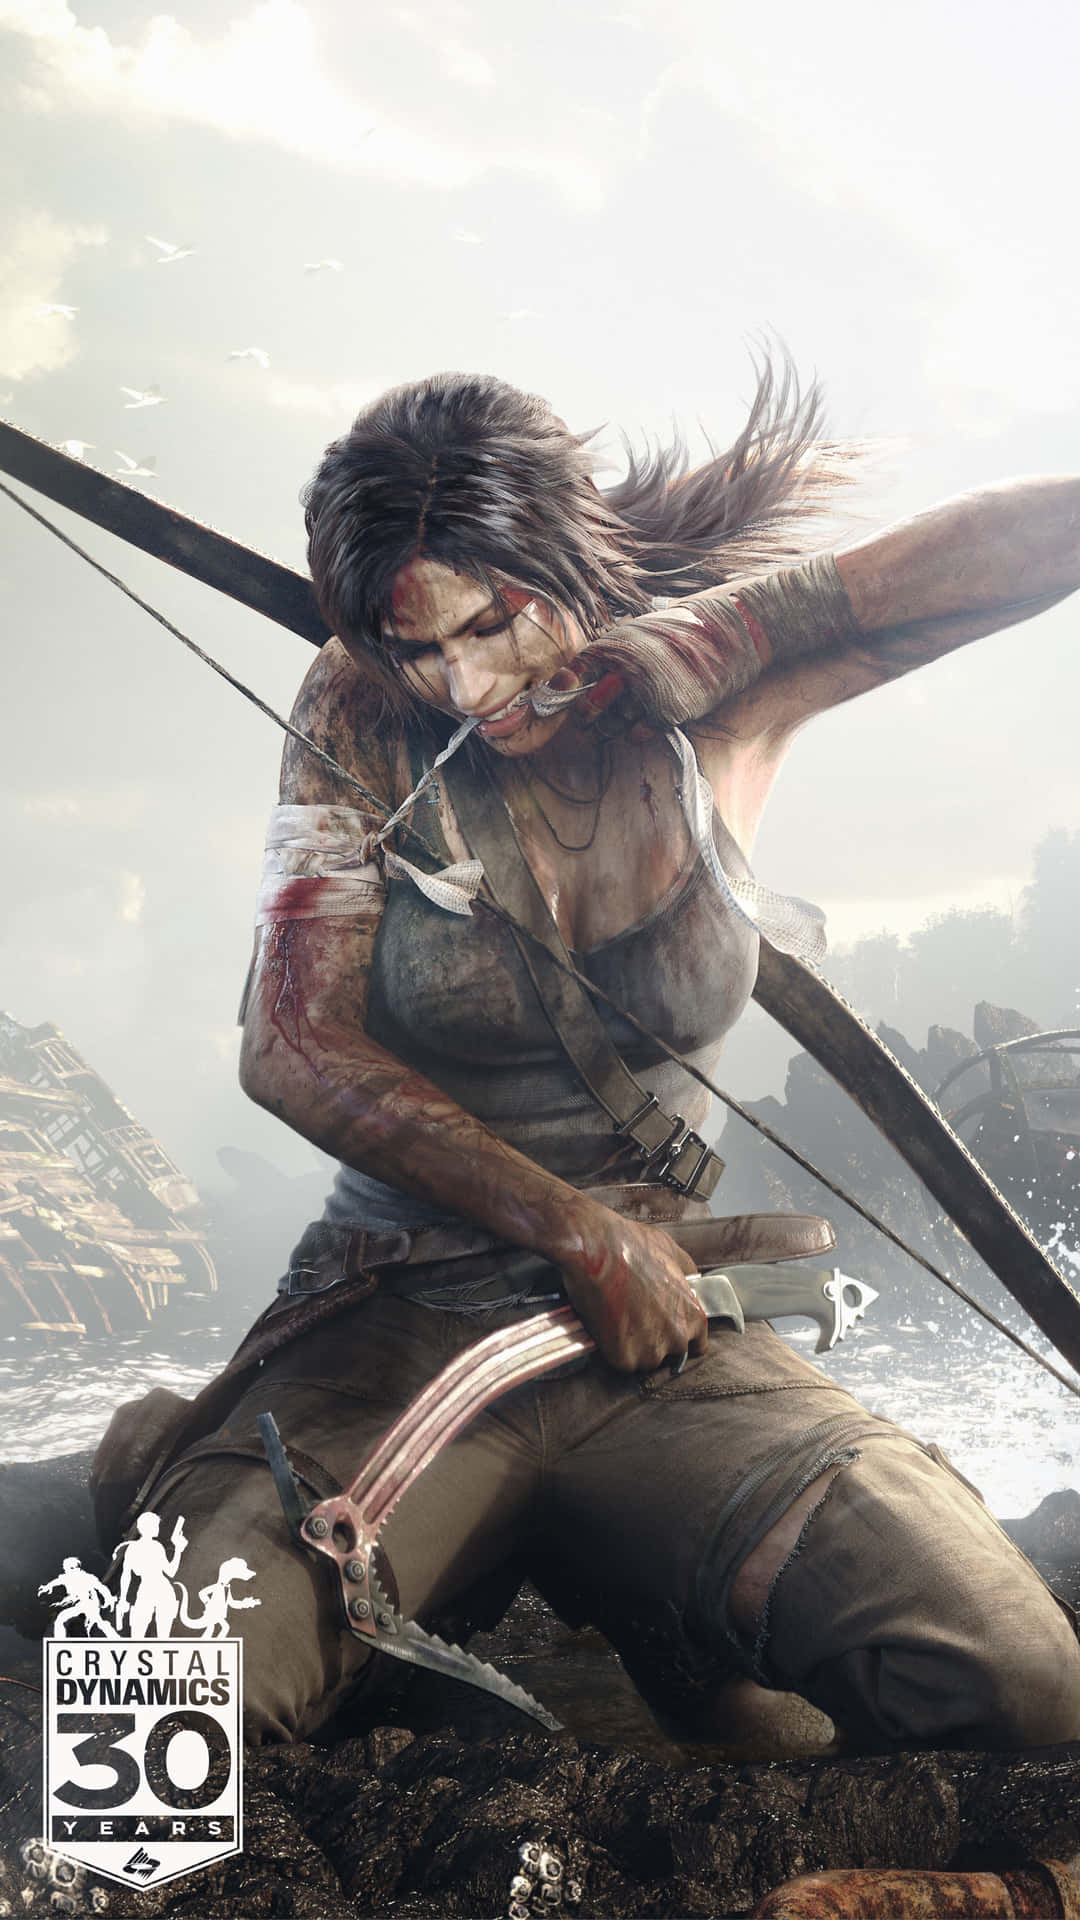 An Action Packed Scene from Tomb Raider for the Iphone 5s Wallpaper